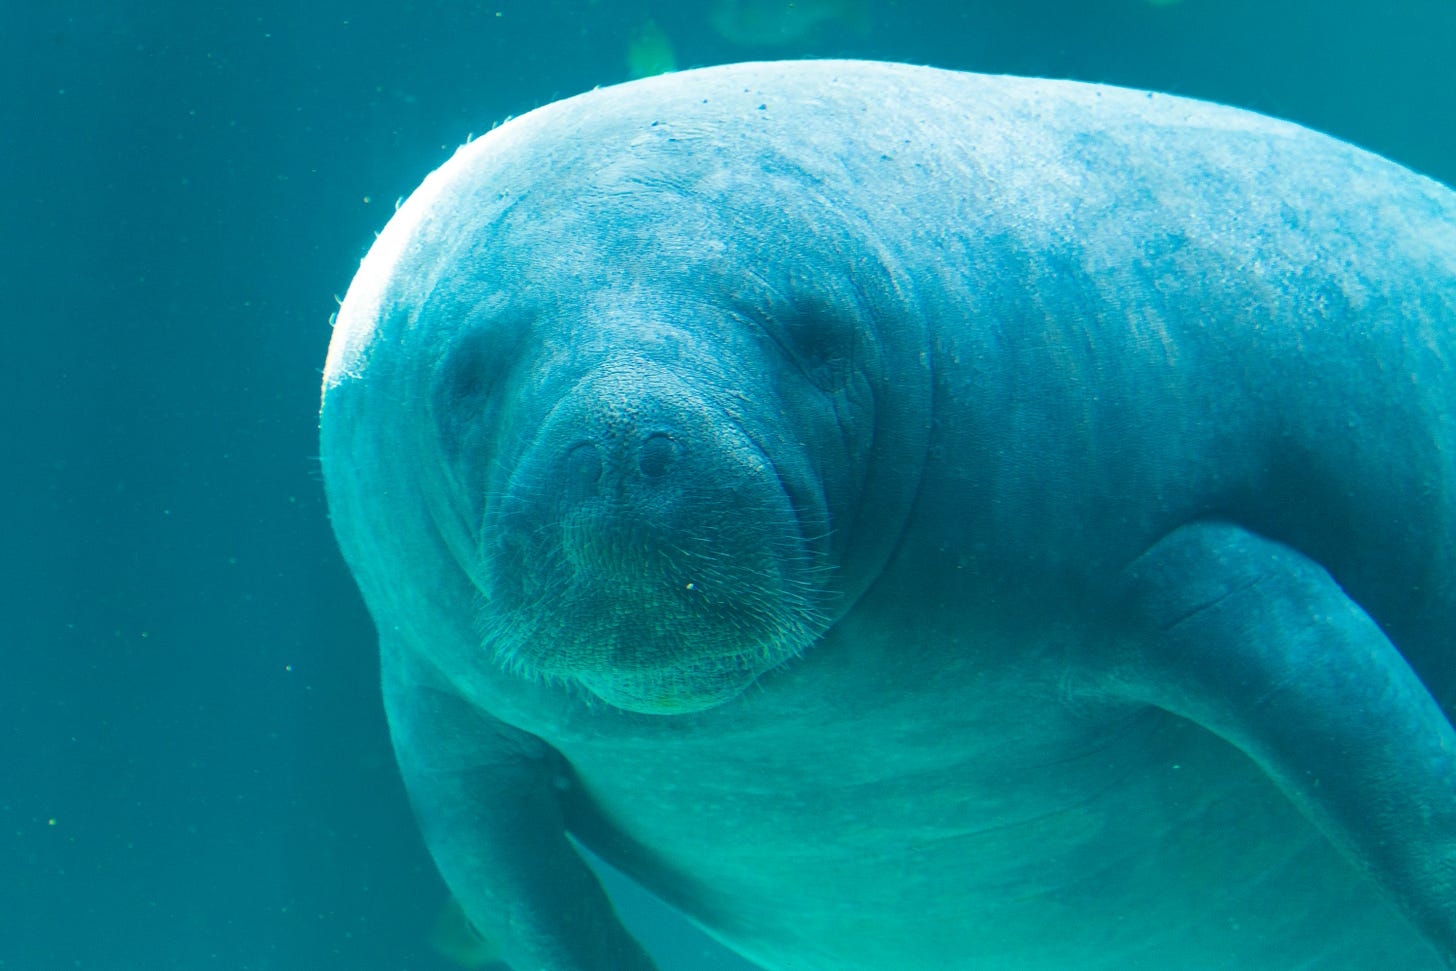 A gray manatee appears blue in the blue-colored water and stares straight into the camera.